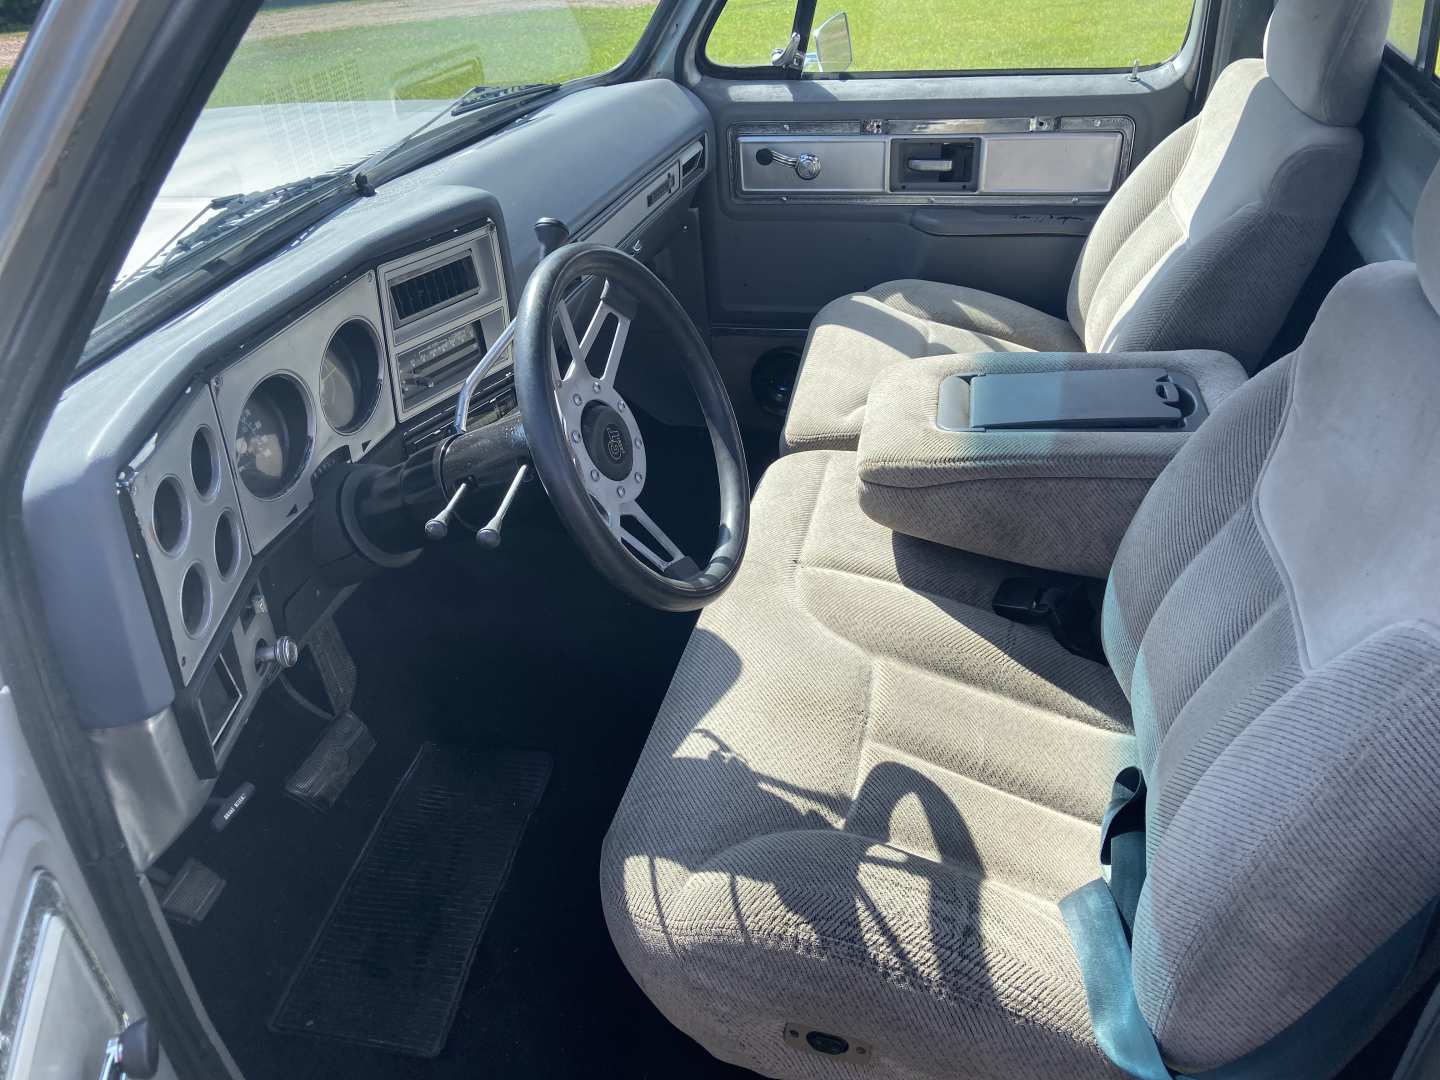 7th Image of a 1979 CHEVROLET C-10